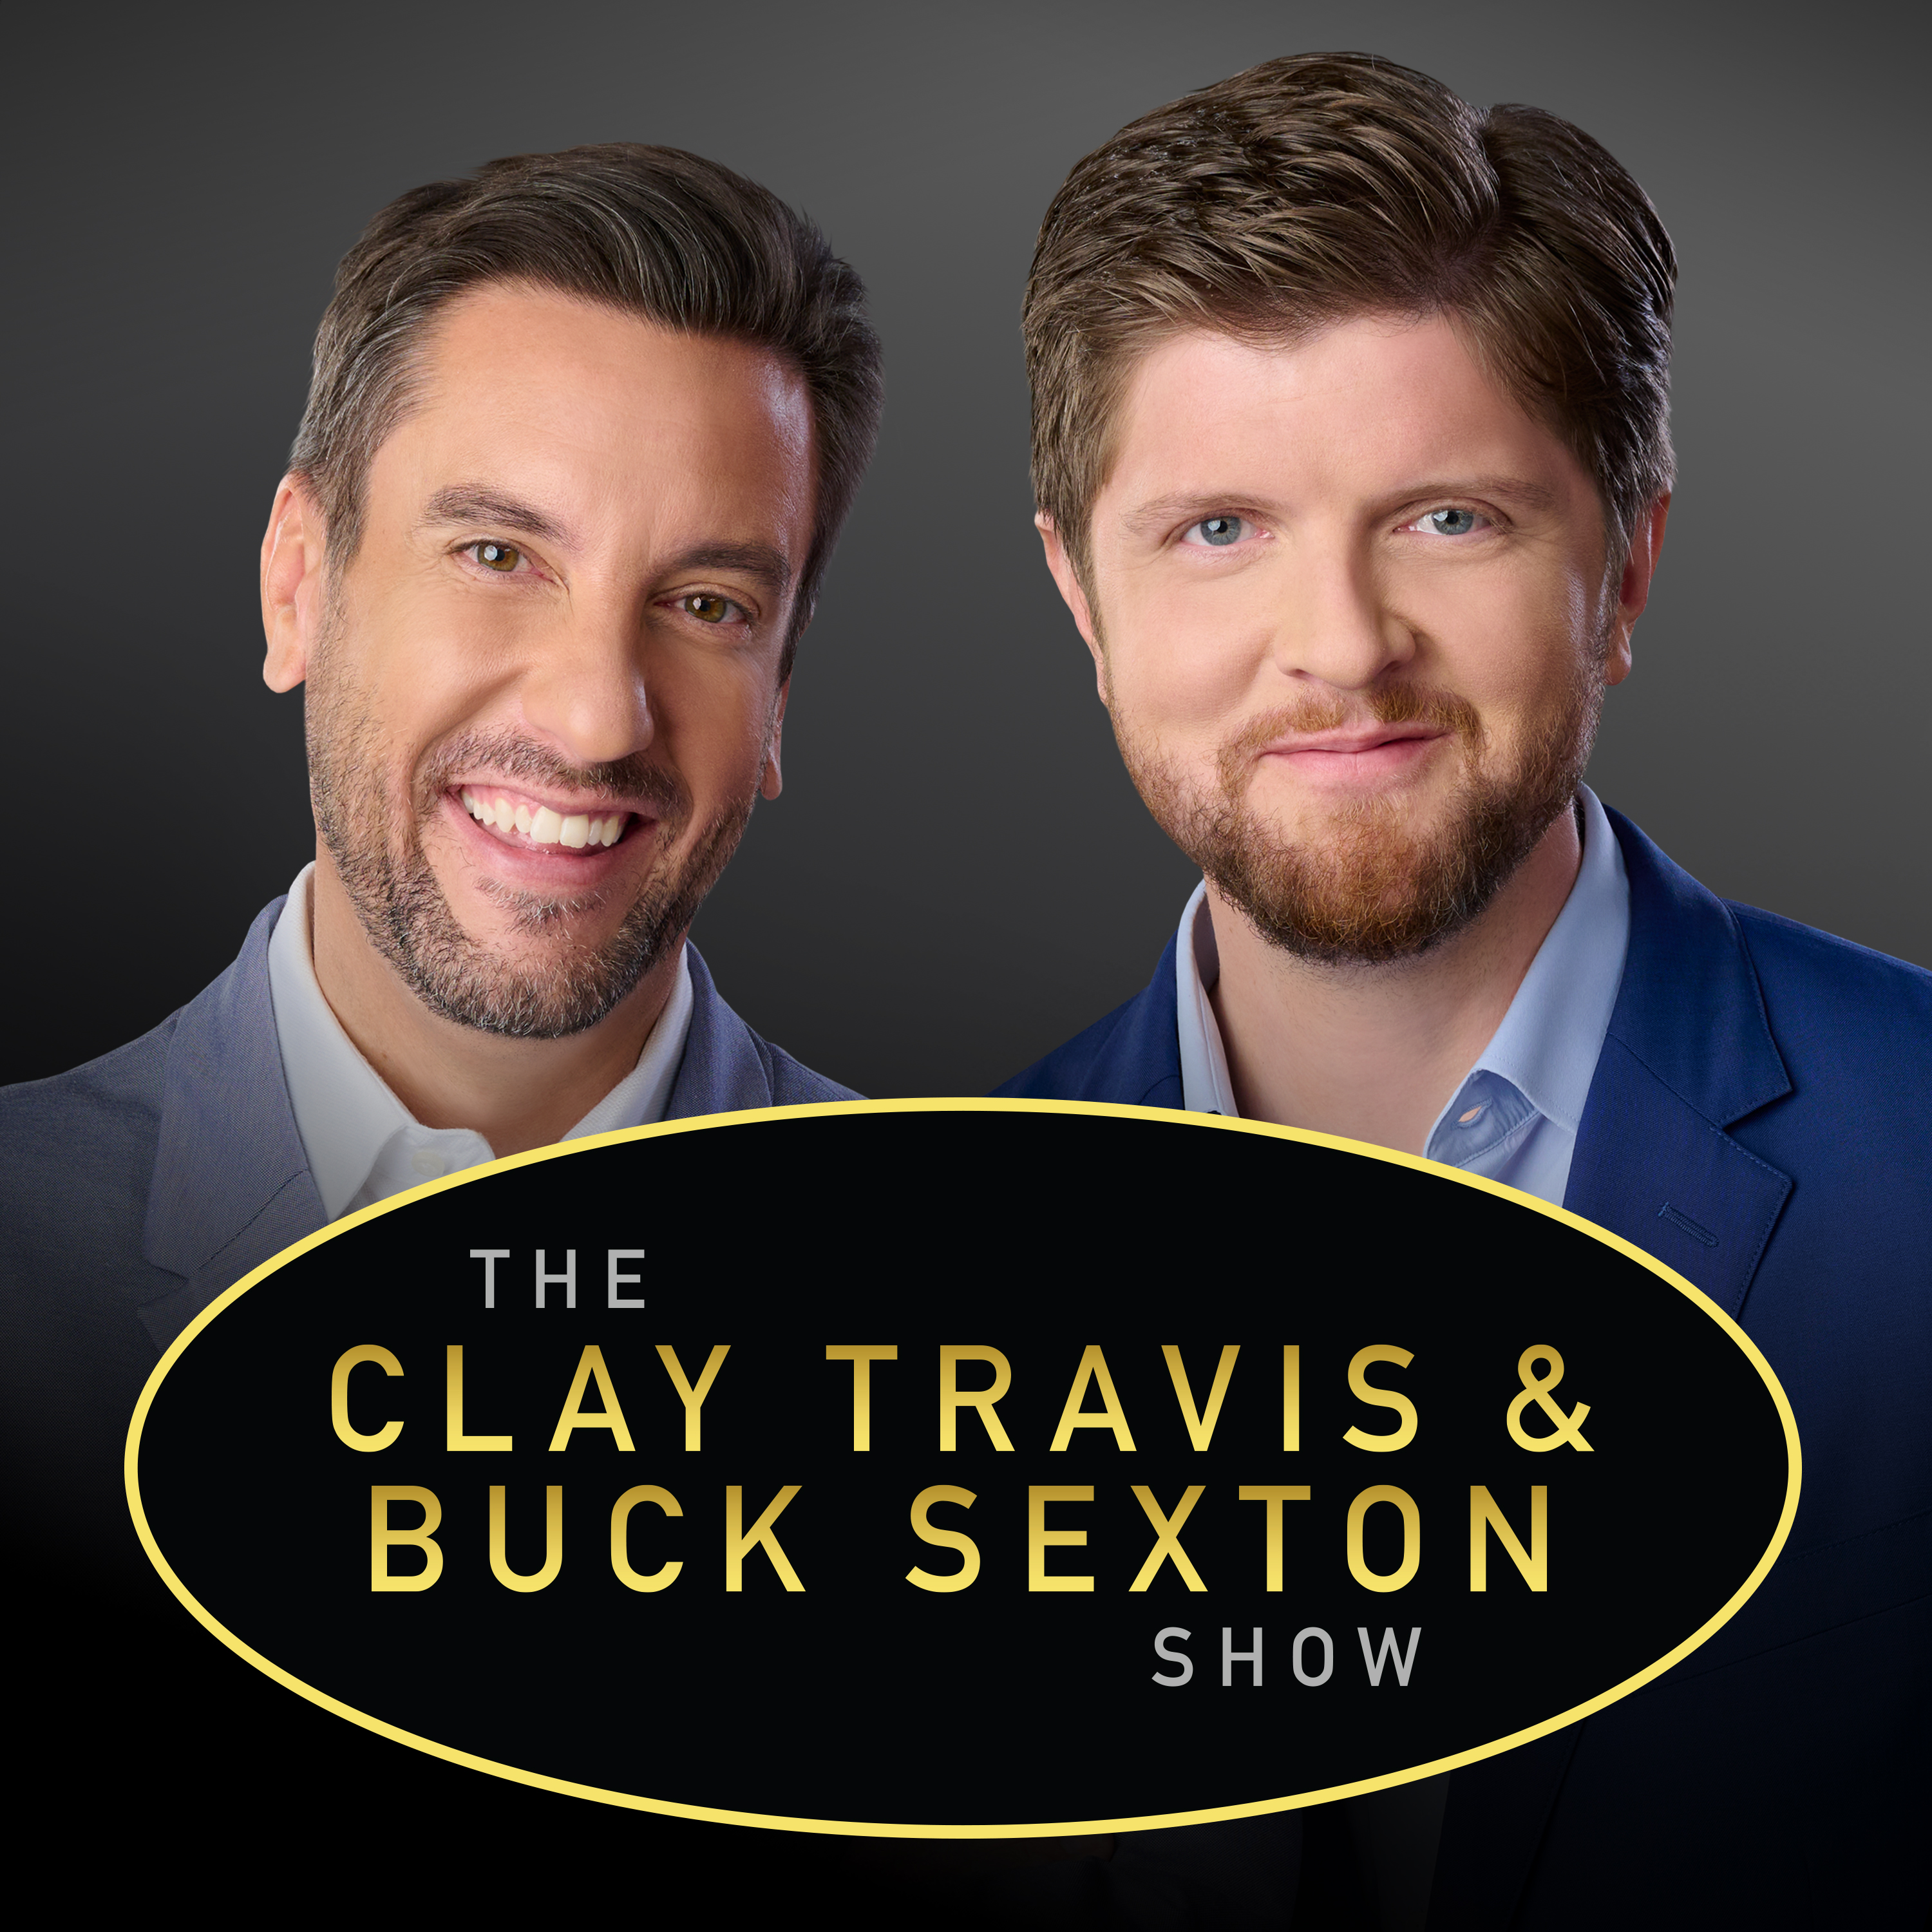 Clay Travis and Buck Sexton Show H2 – Aug 16 2022